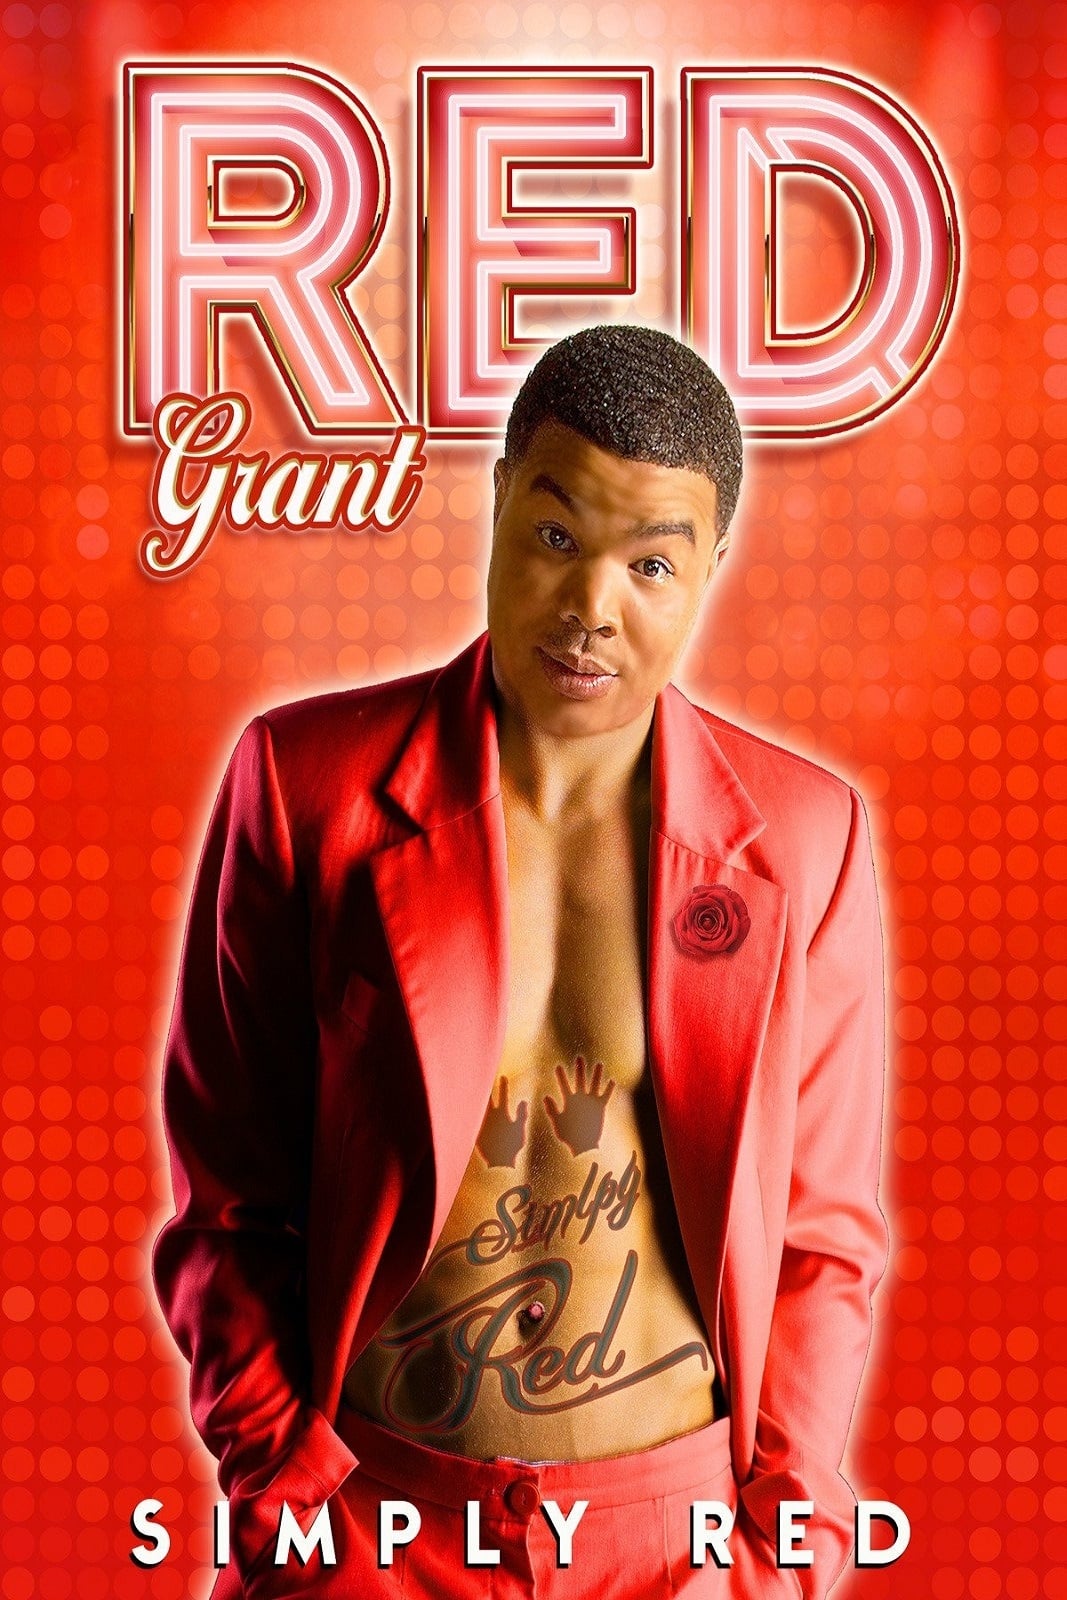 Red Grant: Simply Red